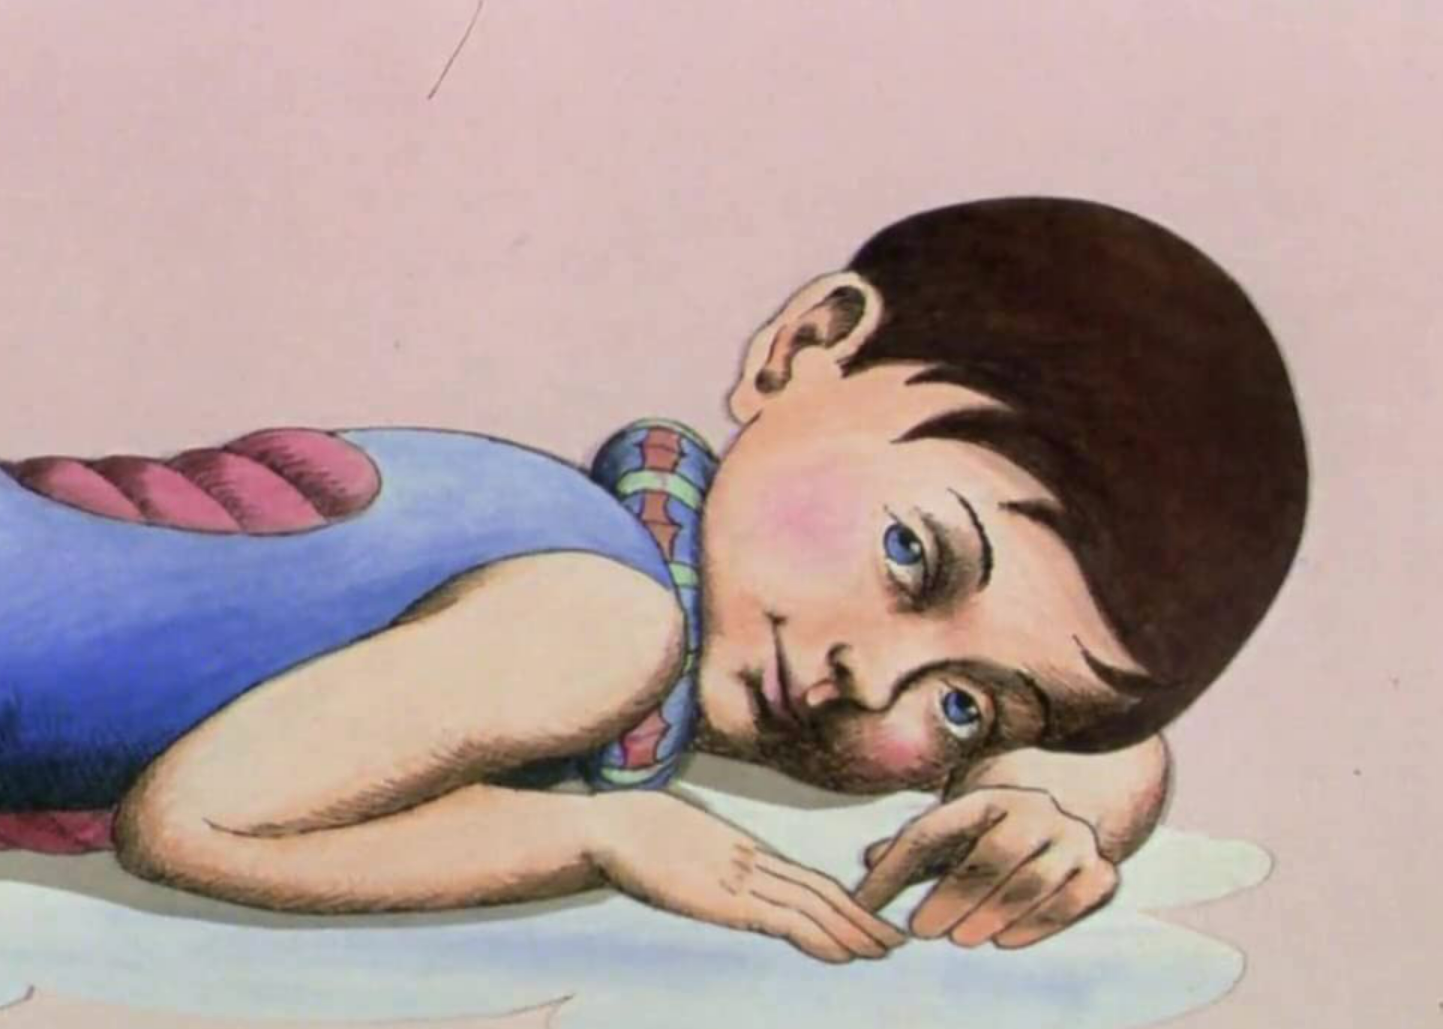 Screengrab of a scene from "Fantastic Planet".